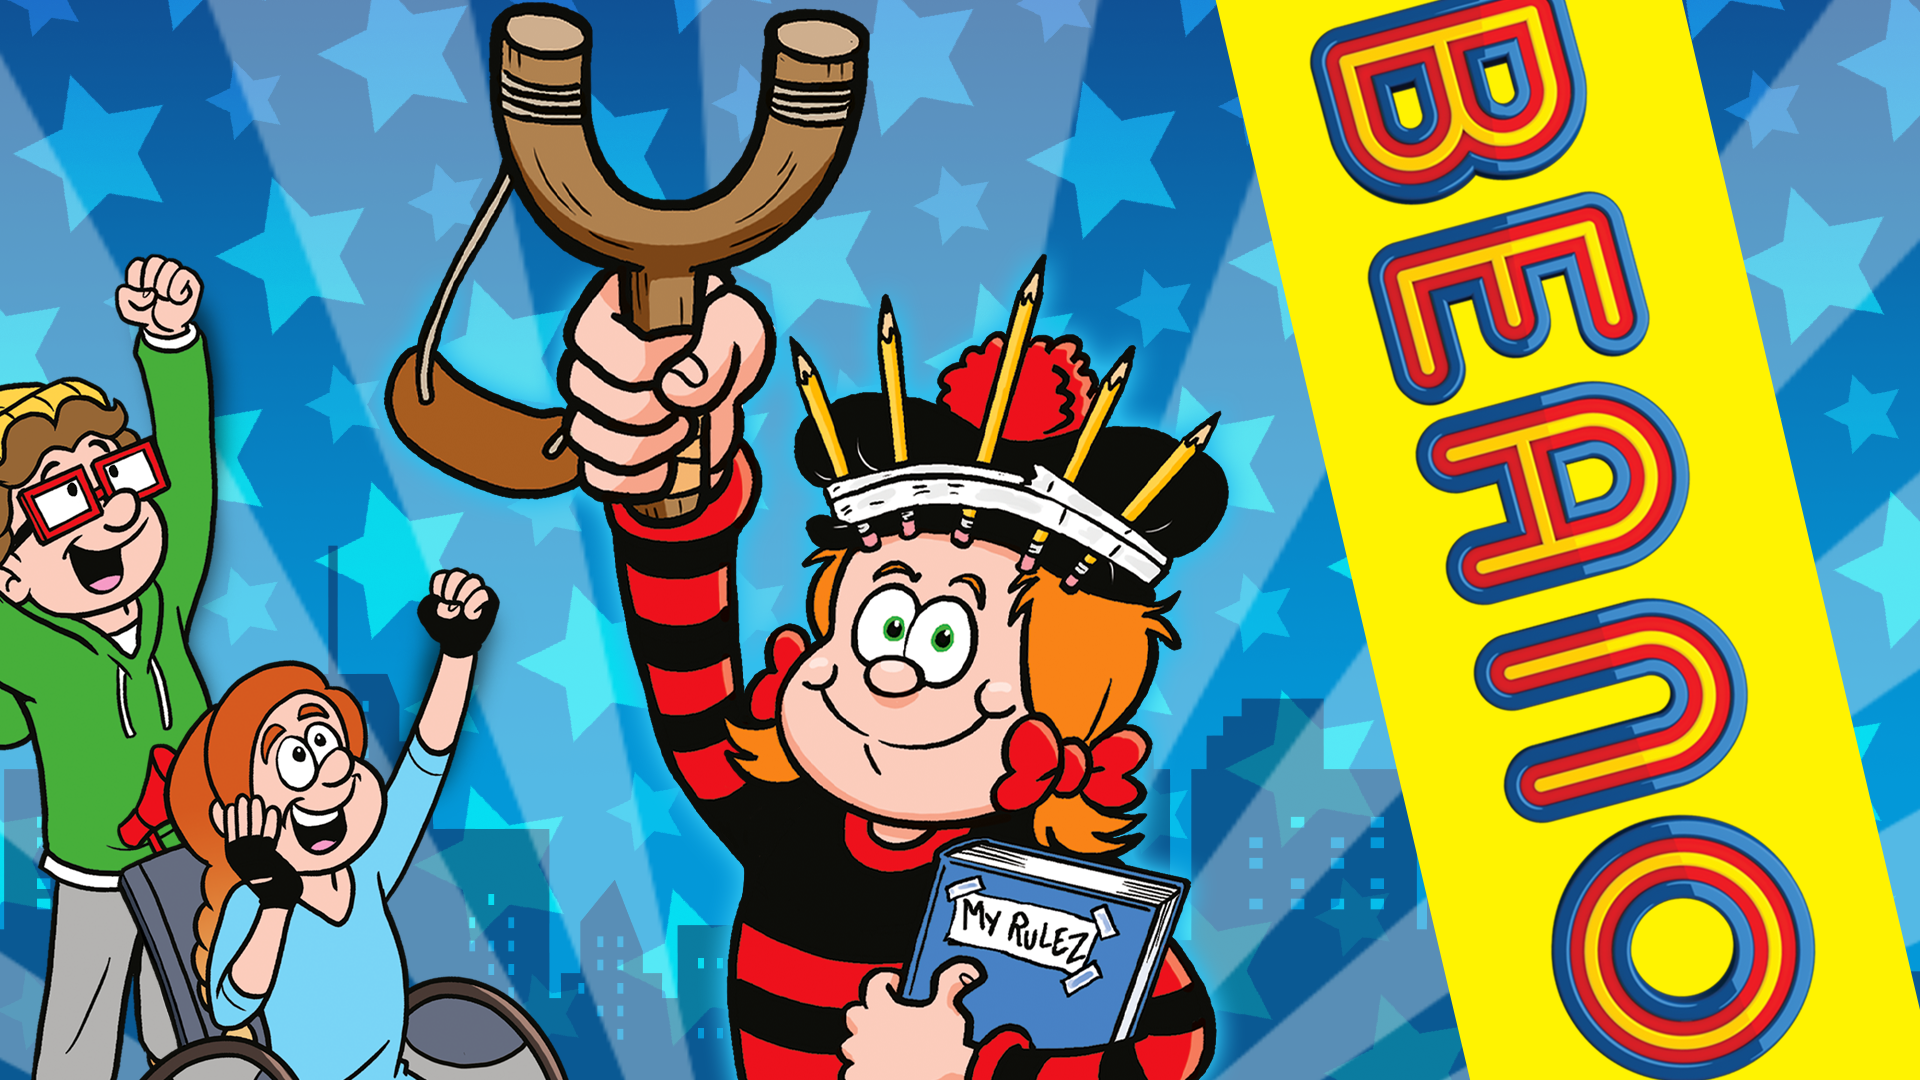 Inside Beano issue no 4043 - MIN-Dependence Day!